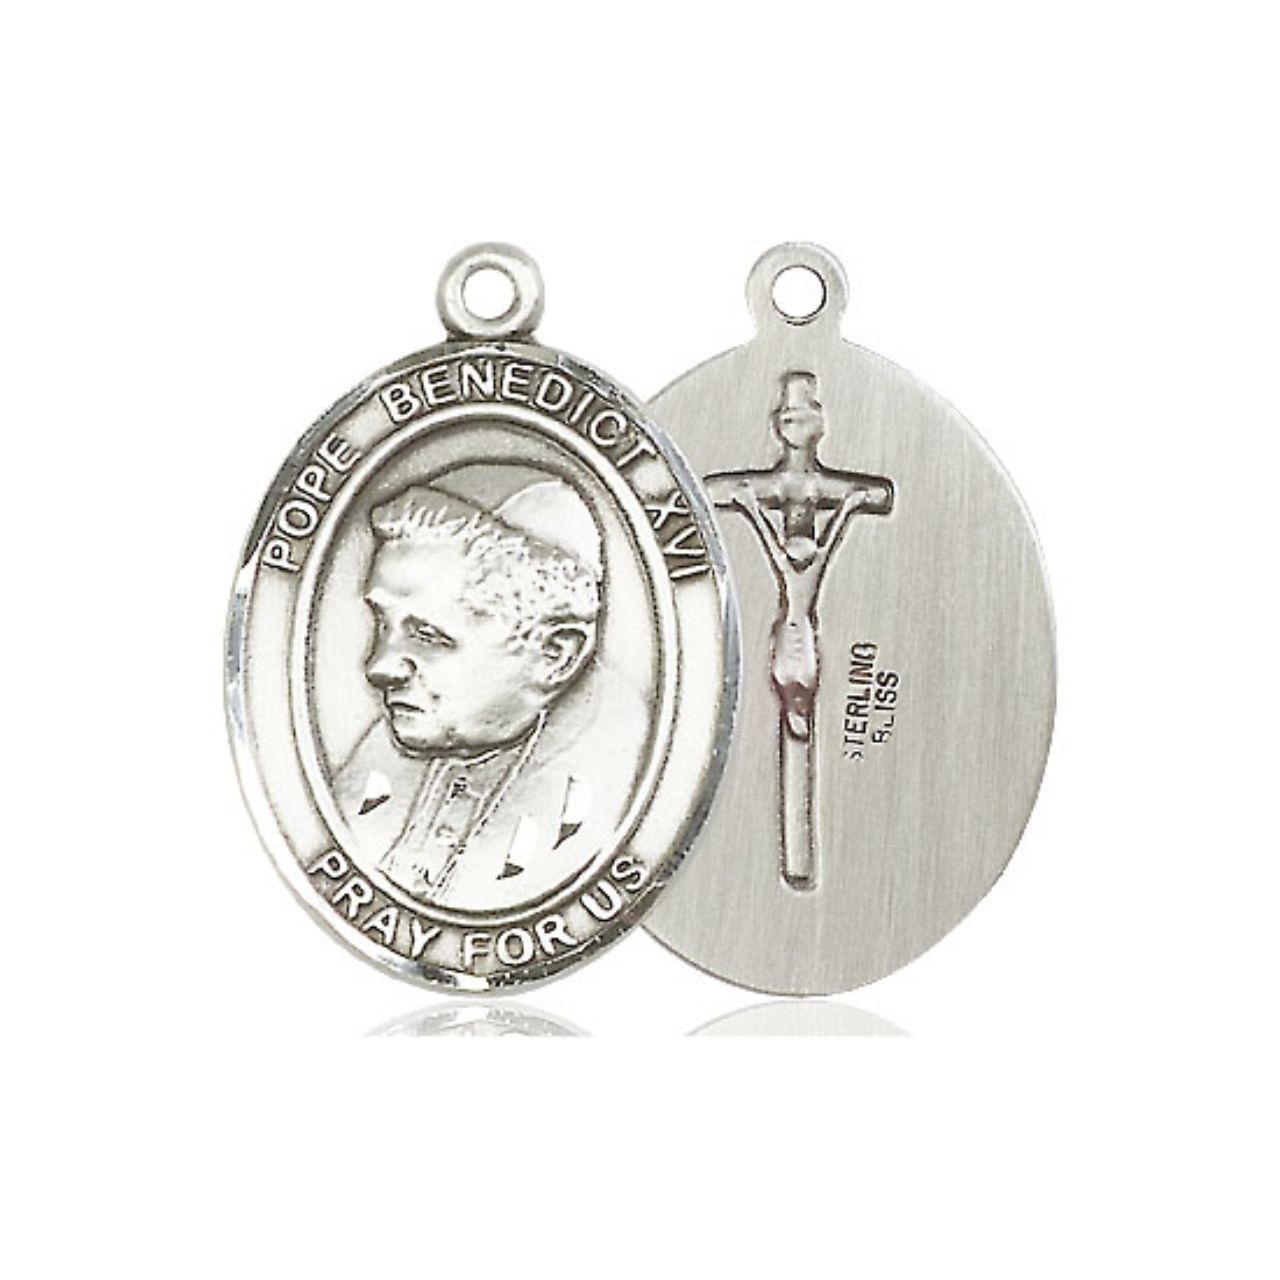 Pope Benedict XVI Medal - Sterling Silver Oval Pendant (3 Sizes)